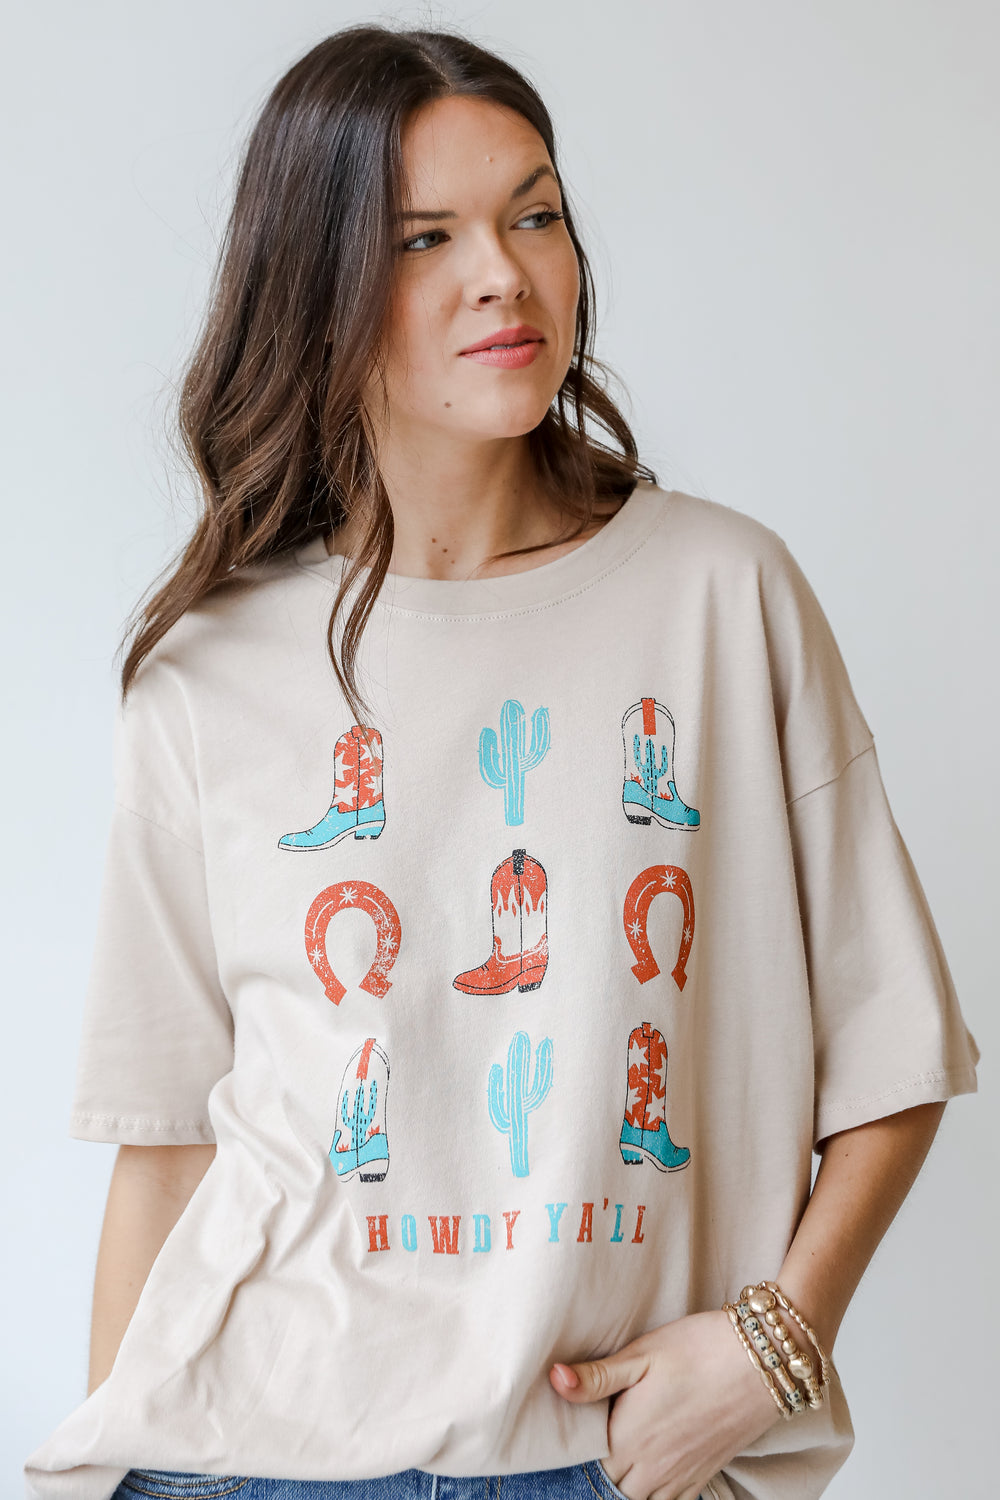 Howdy Ya'll Graphic Tee from dress up